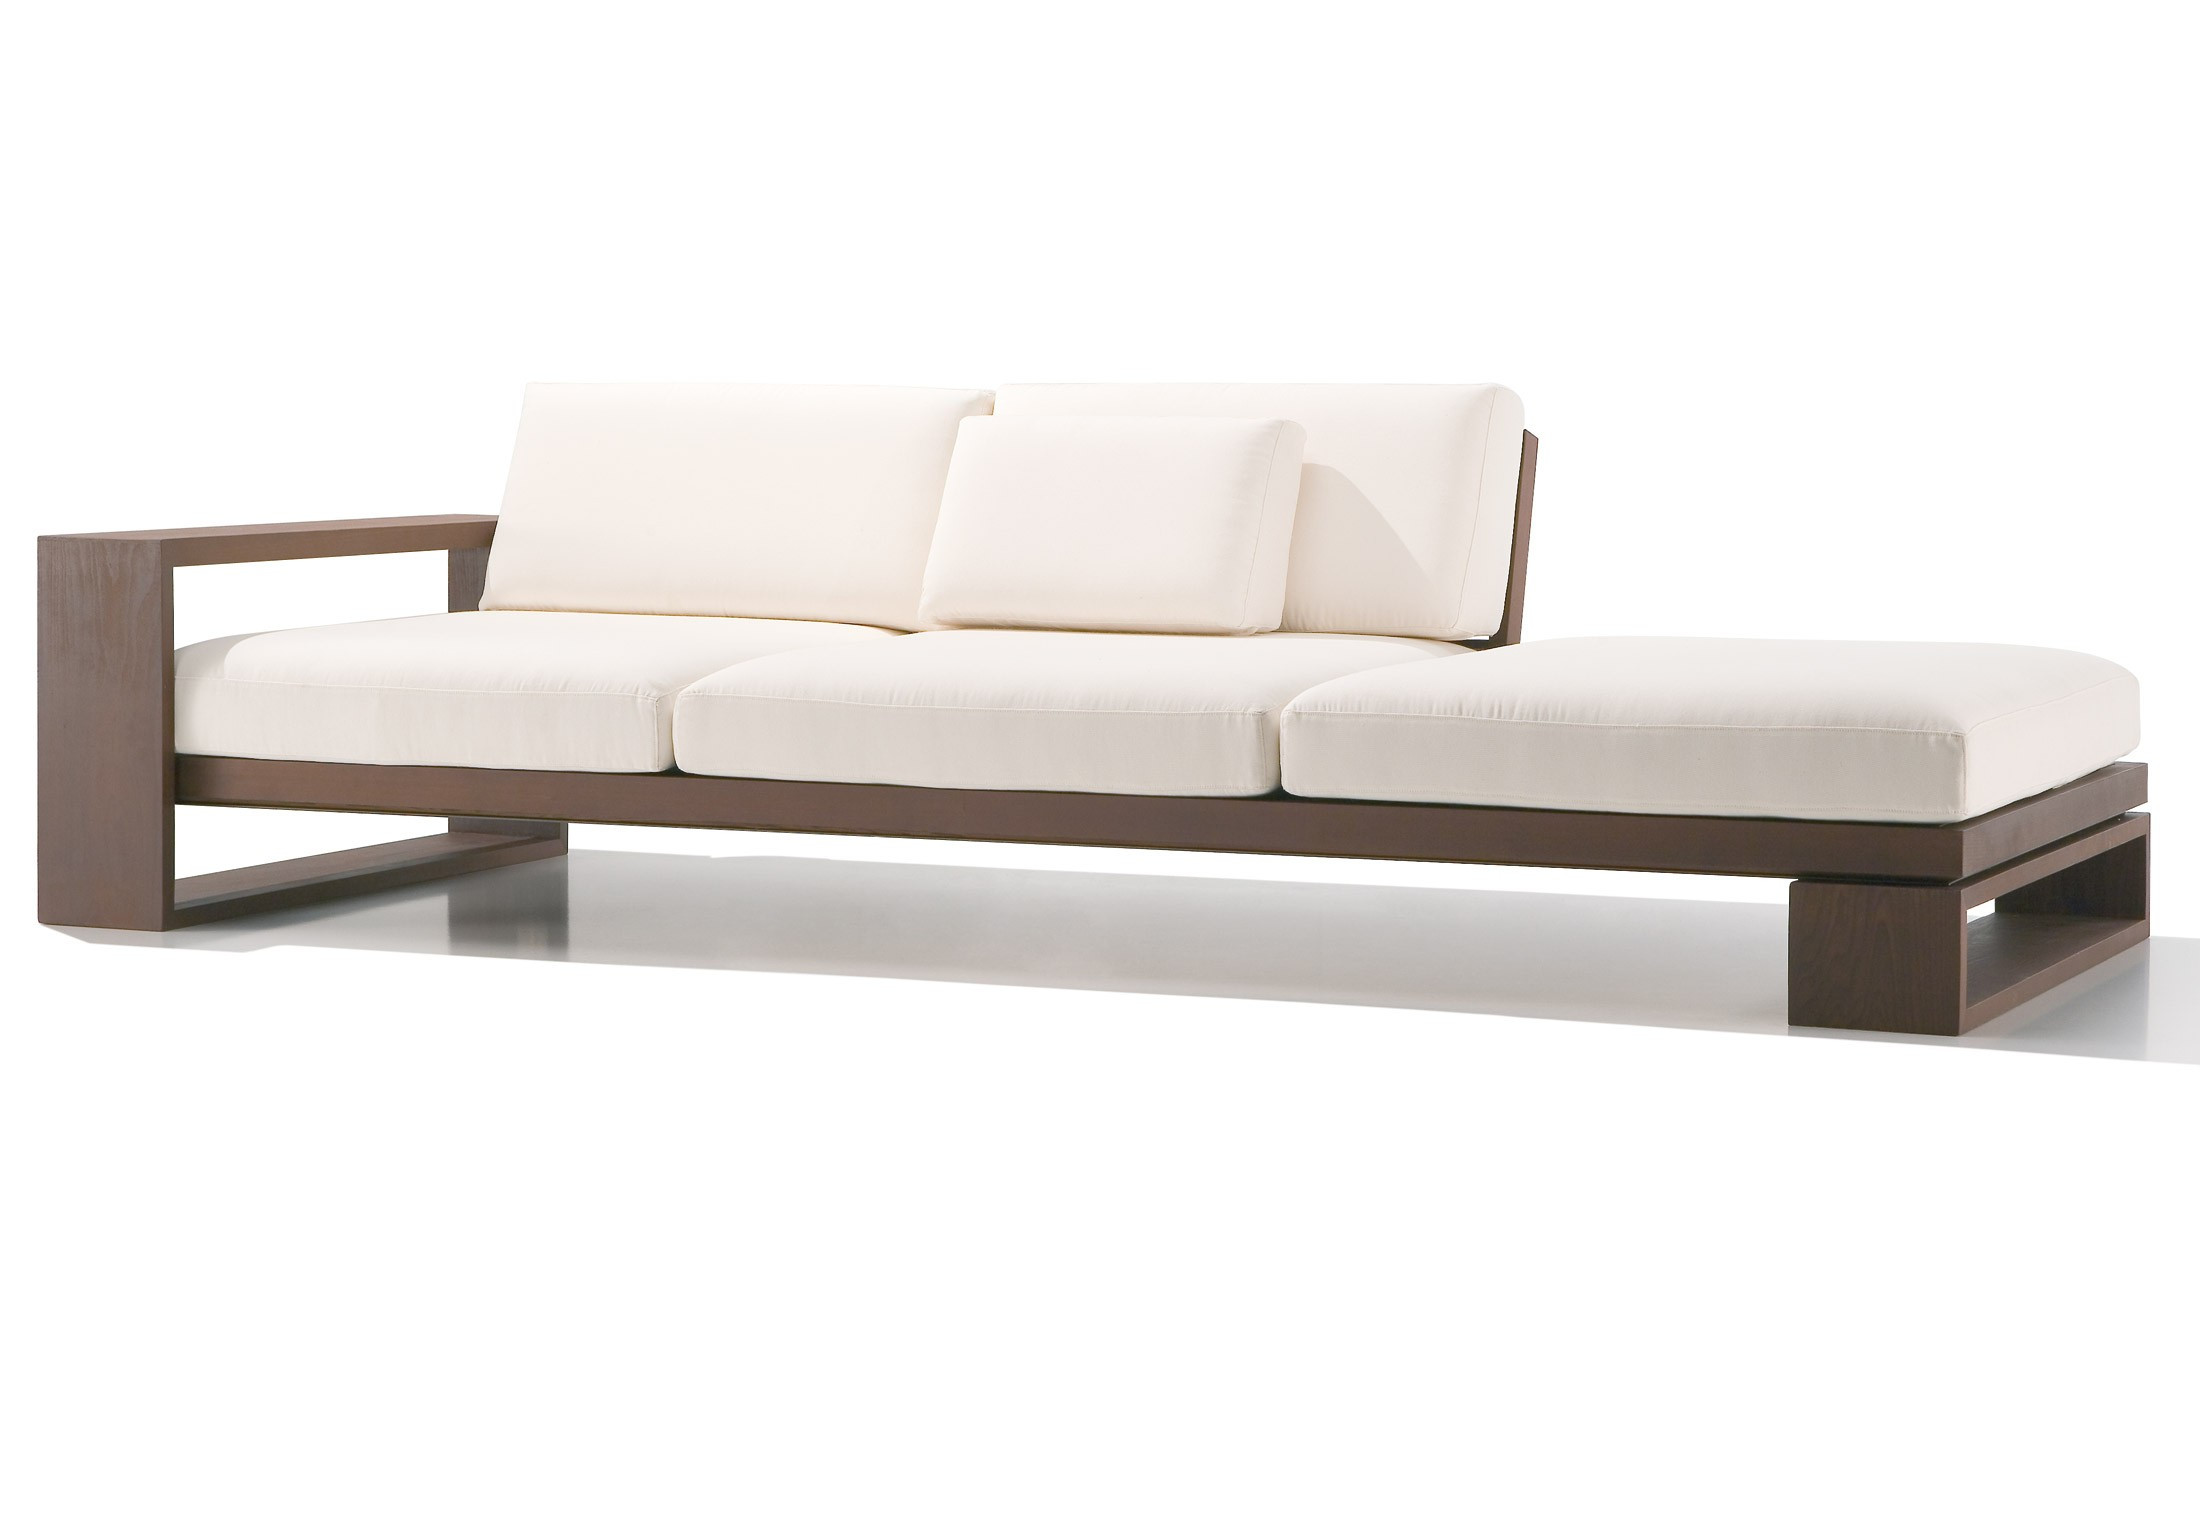 Design Sofa
 24 Simple Wooden Sofa to Use in Your Home